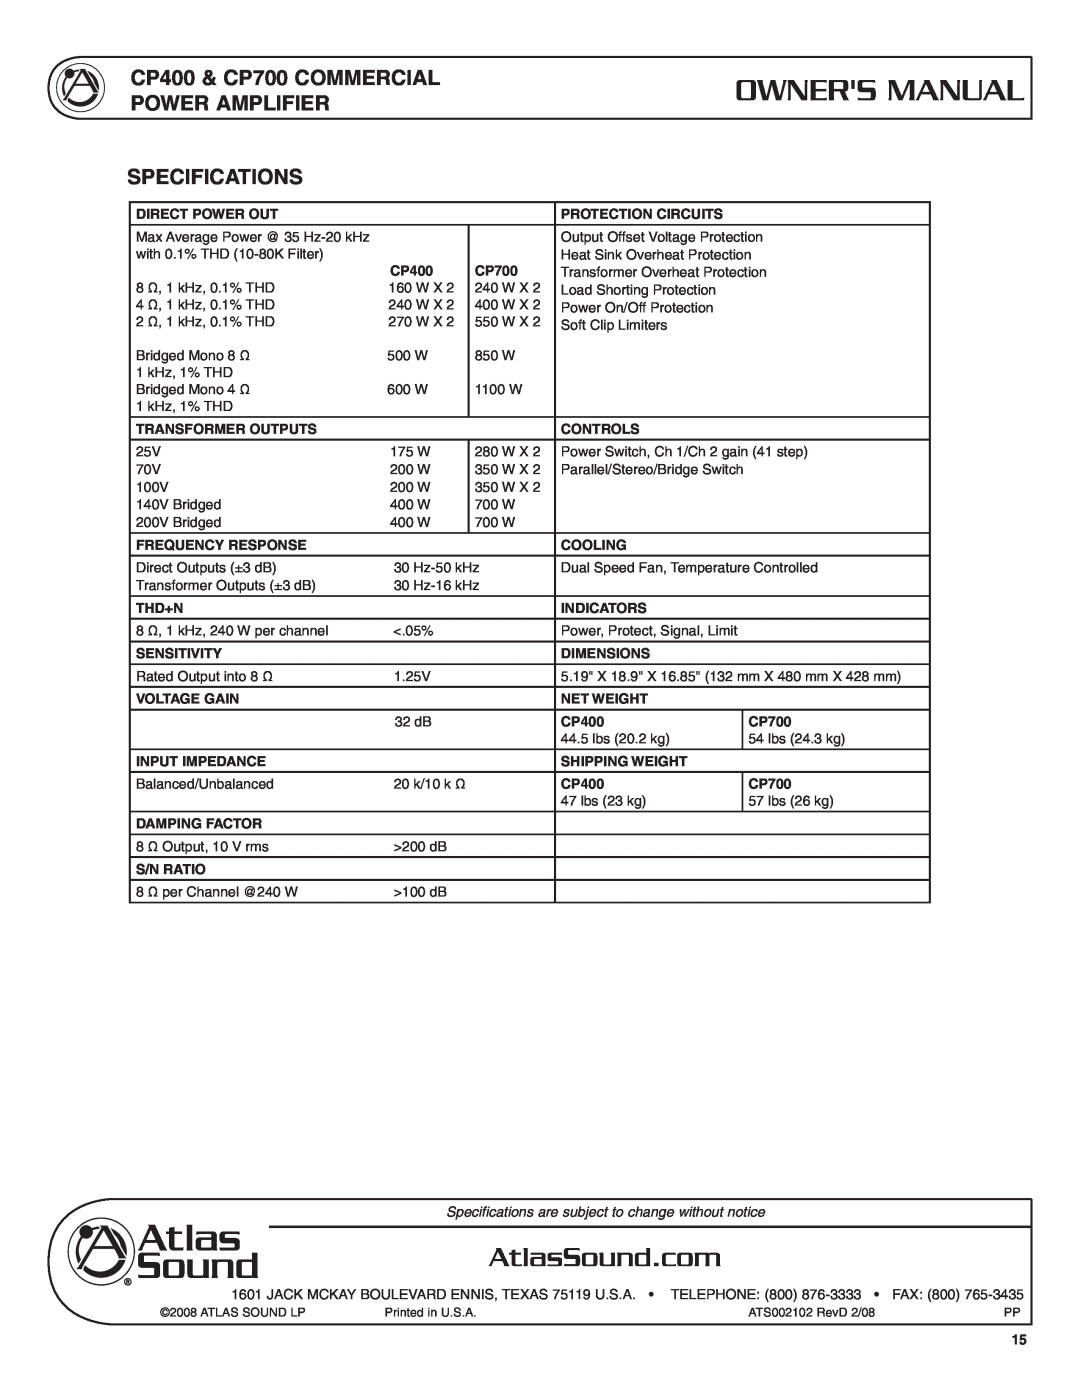 Atlas Sound user service Specifications, CP400 & CP700 COMMERCIAL POWER AMPLIFIER 